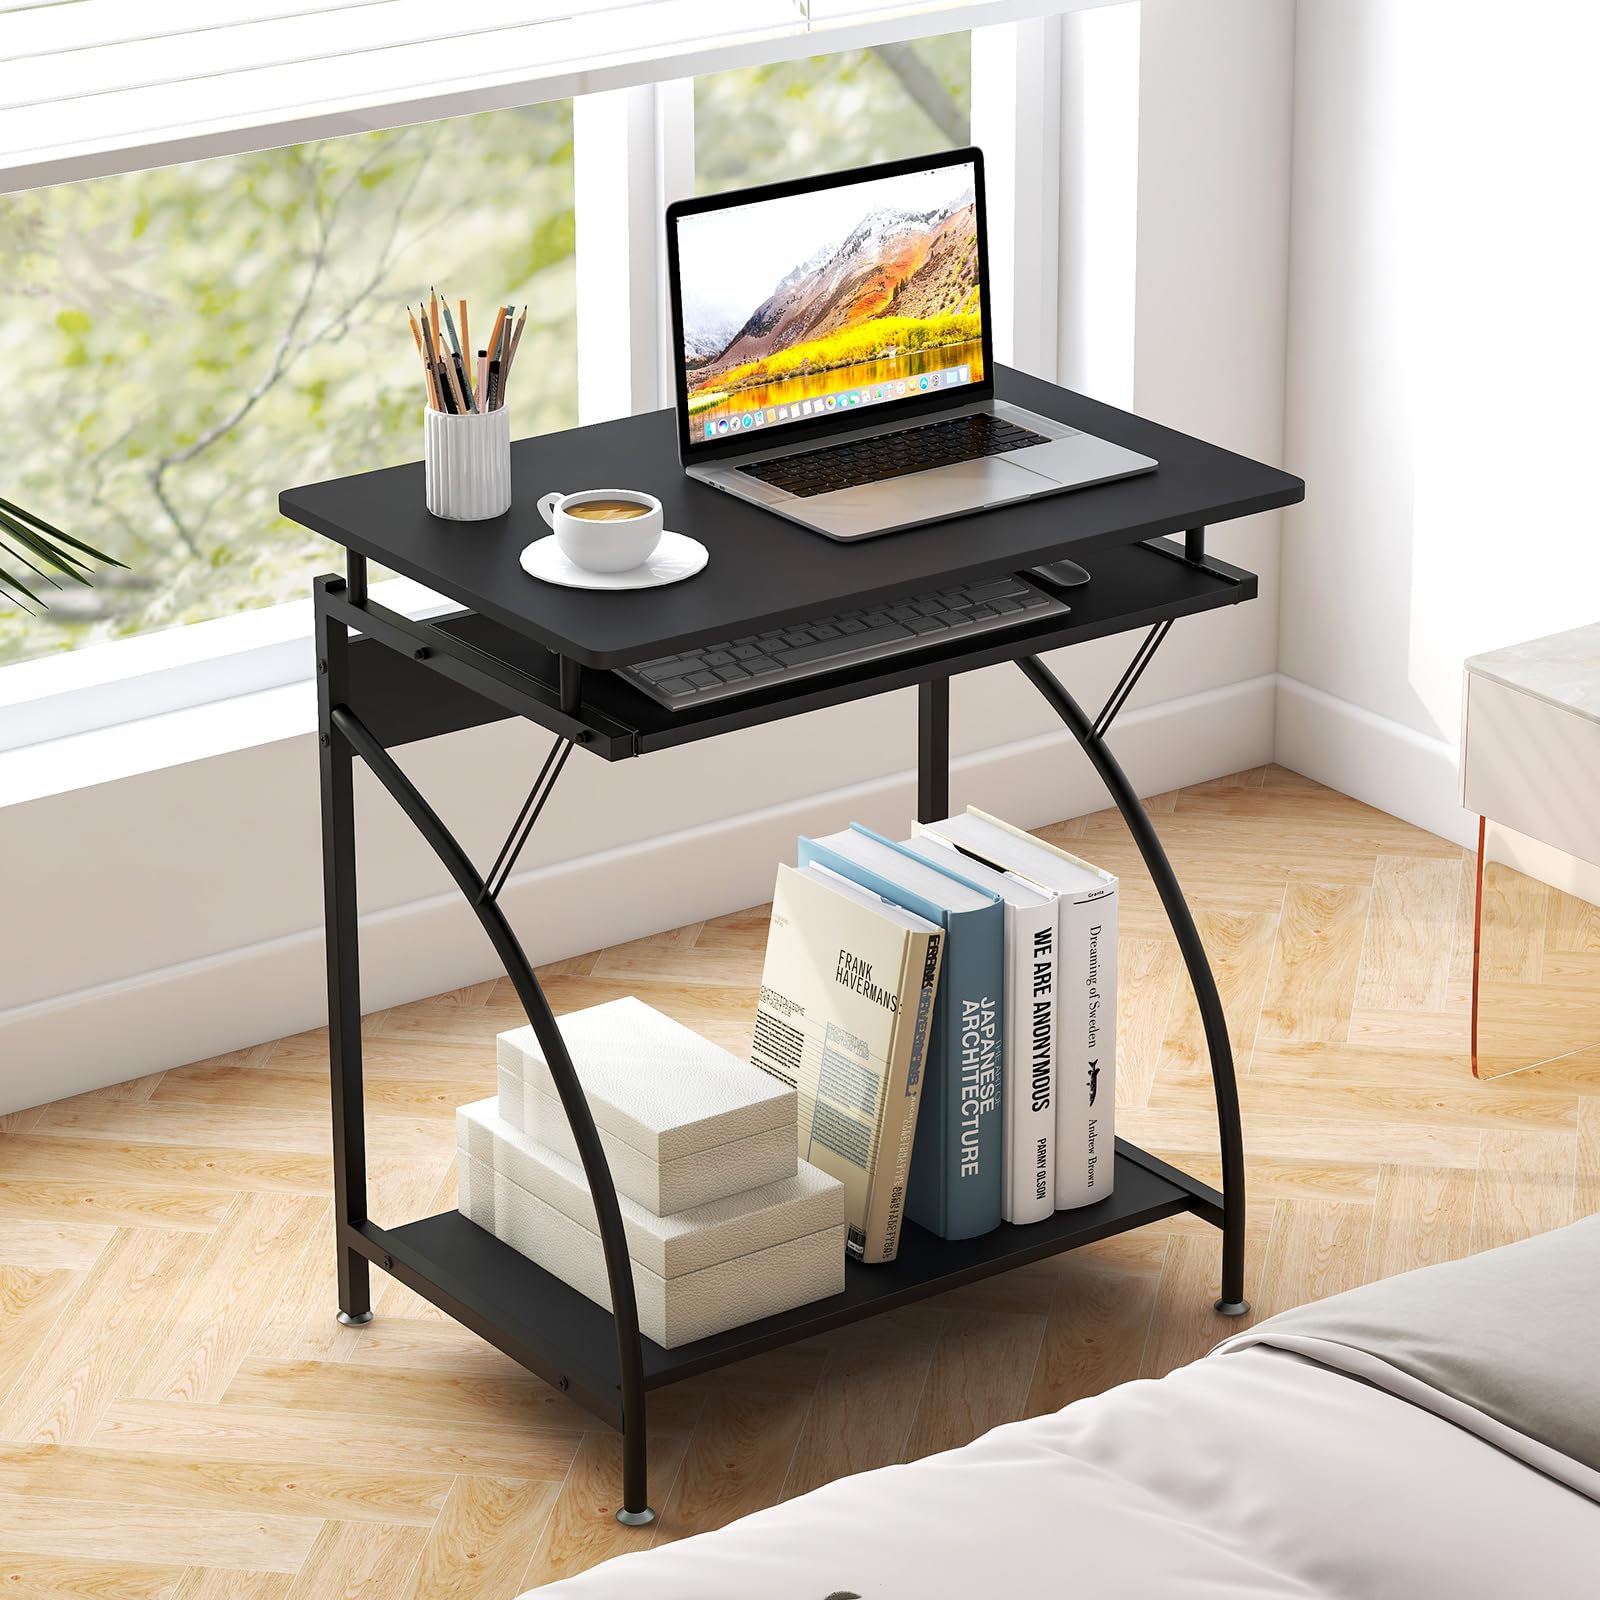 Giantex Computer Desk for Small Spaces, 27.5" Laptop Table with Pull-Out Keyboard Tray & Bottom Storage Shelf